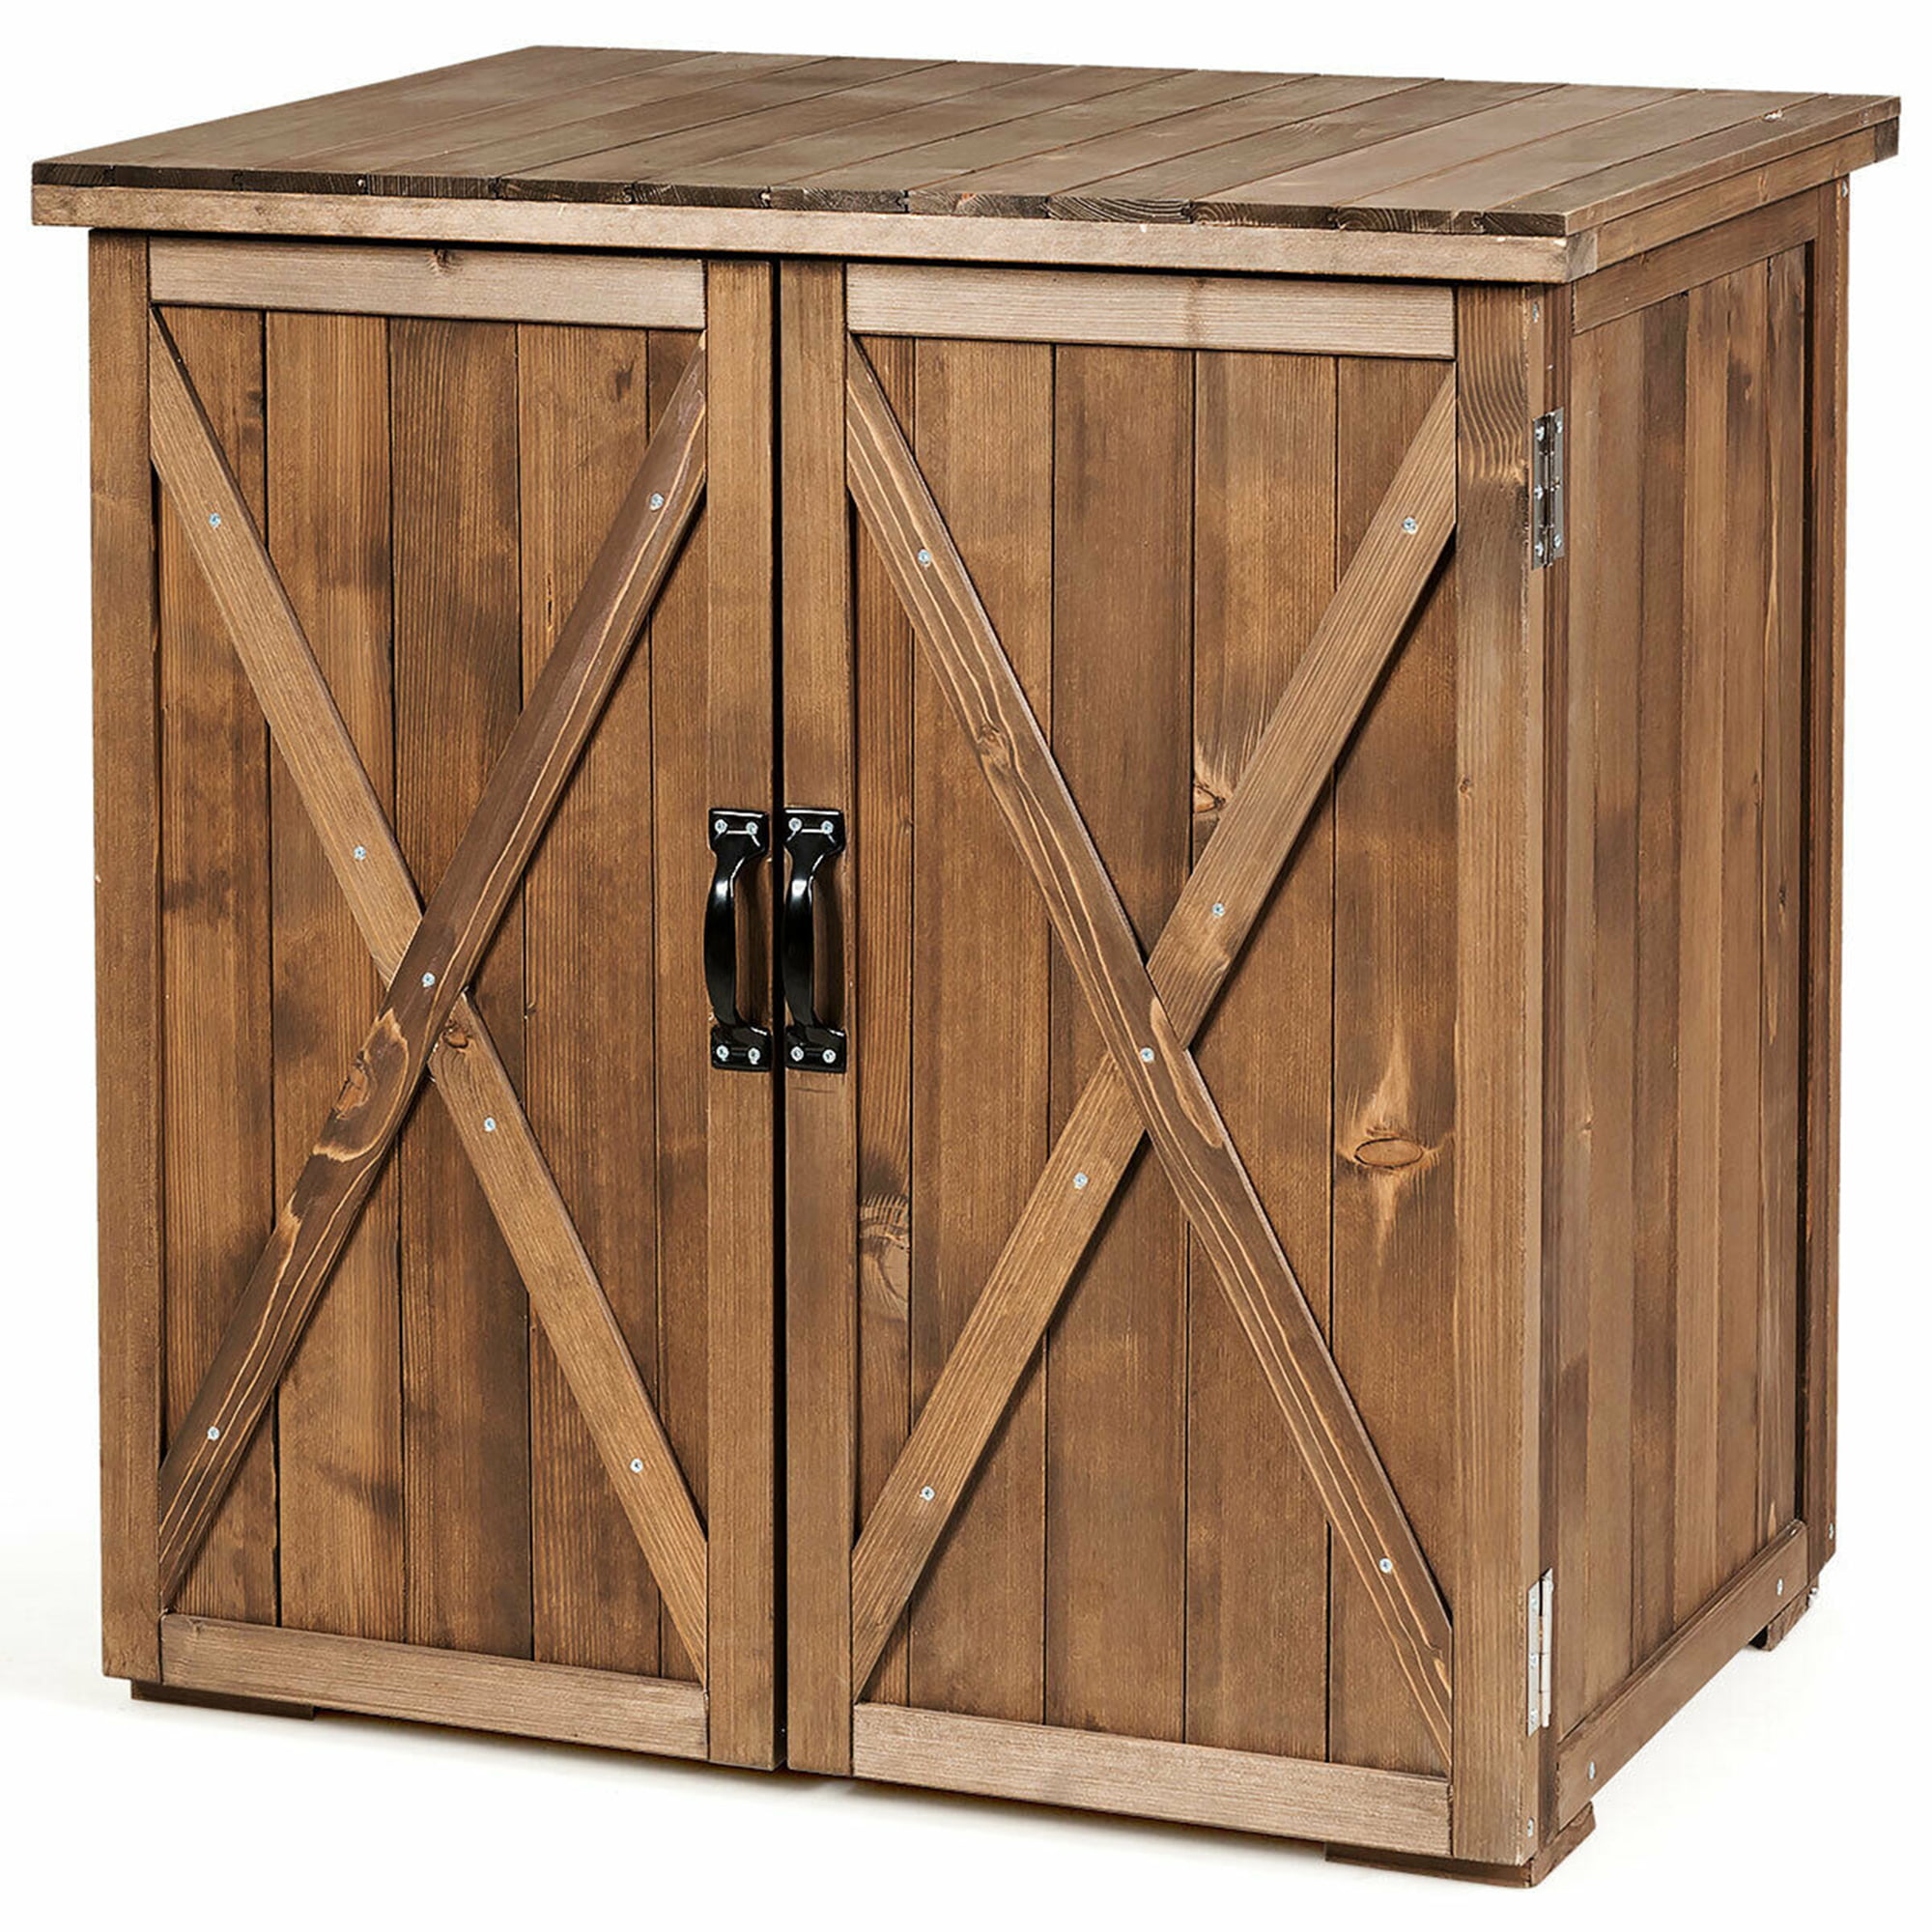 Outdoor Wood Storage Shed, Storage Shed Cabinet